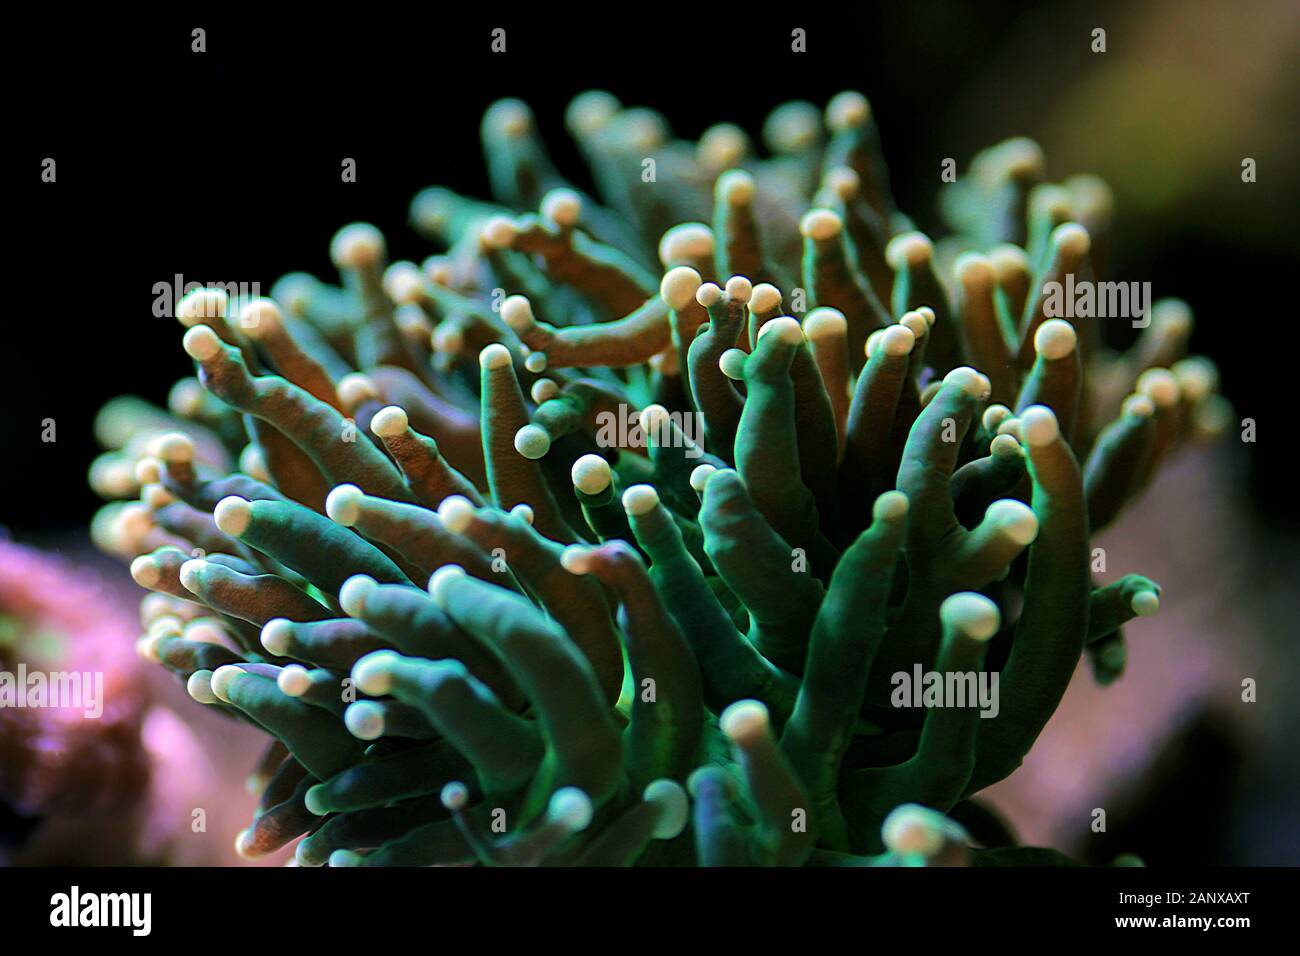 Green Euphyllia Torch Aussie LPS coral Stock Photo